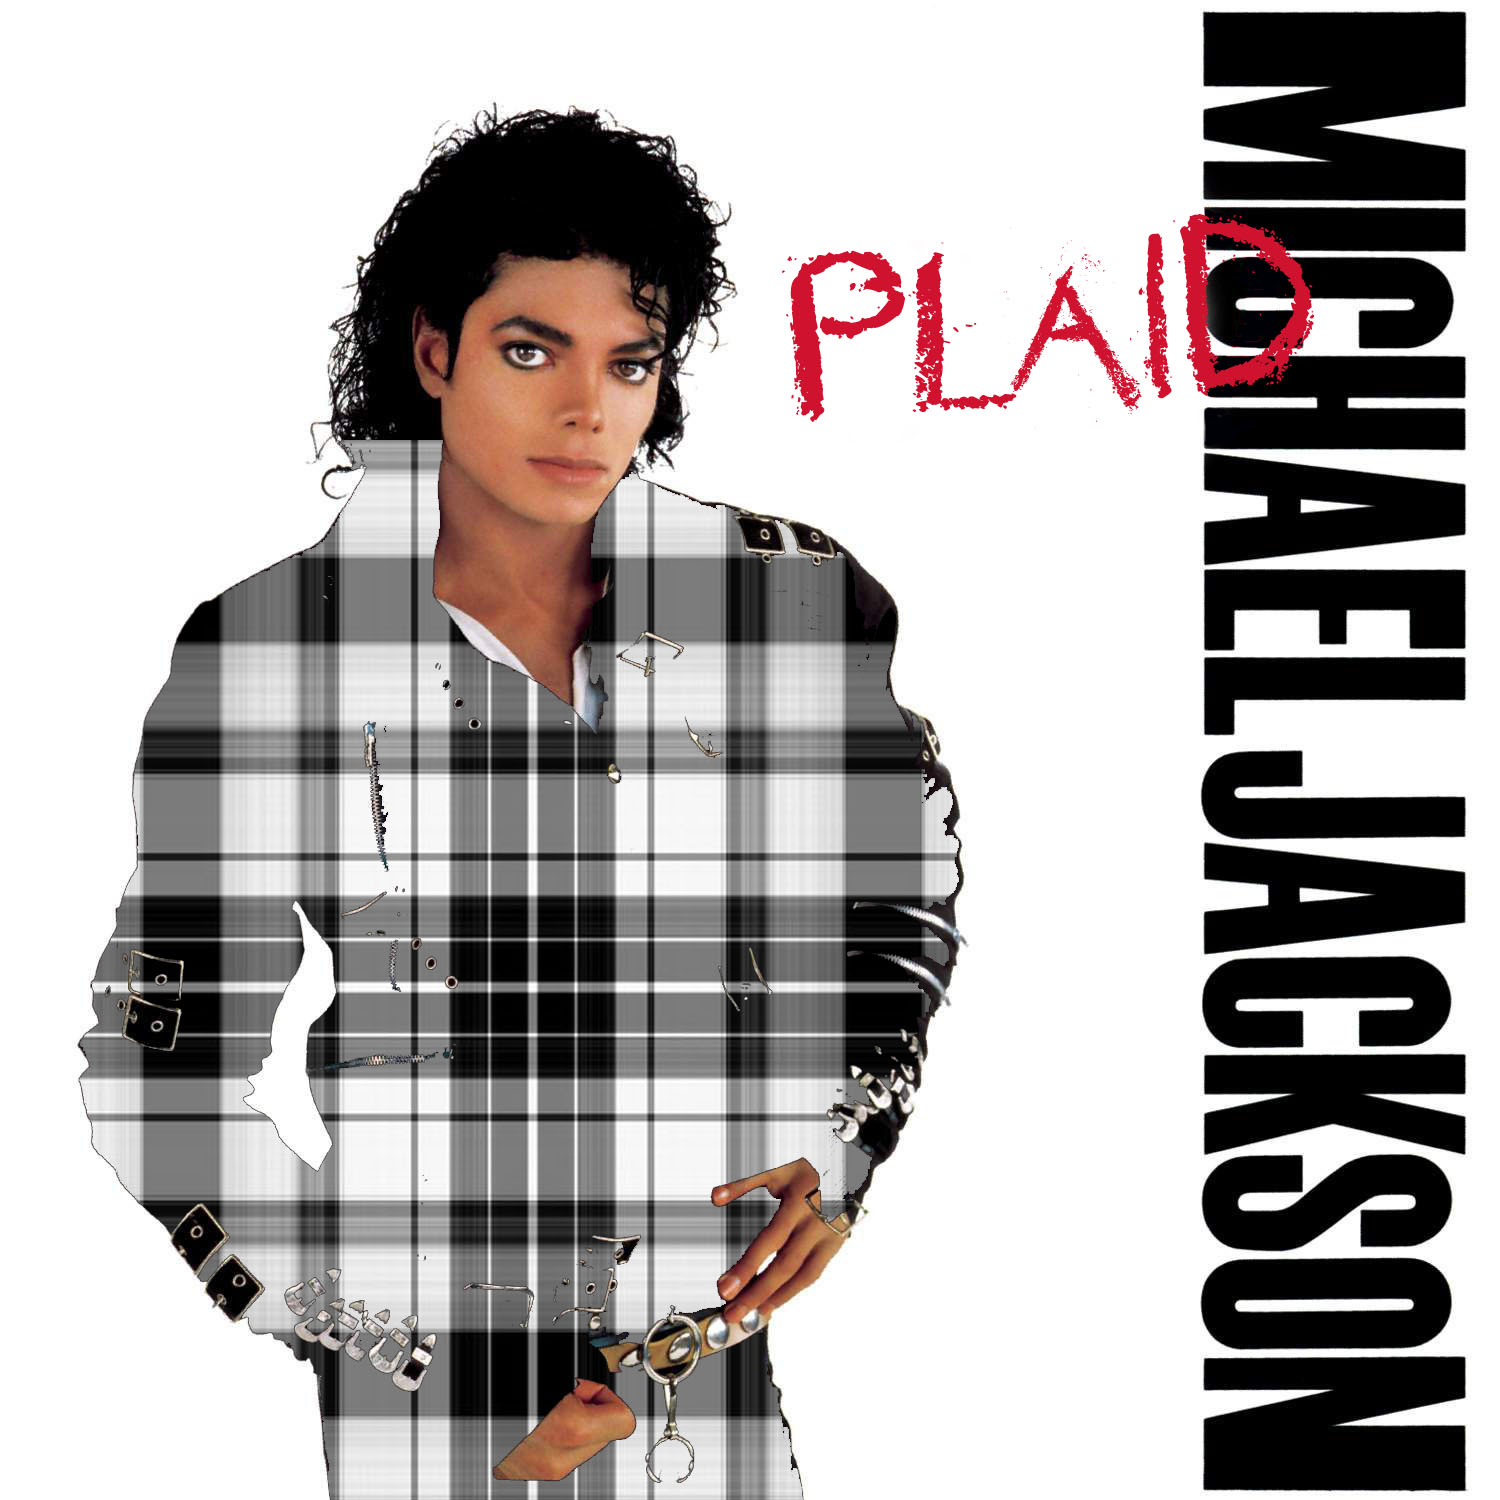 Album cover parody of Bad (Remastered) by Michael Jackson